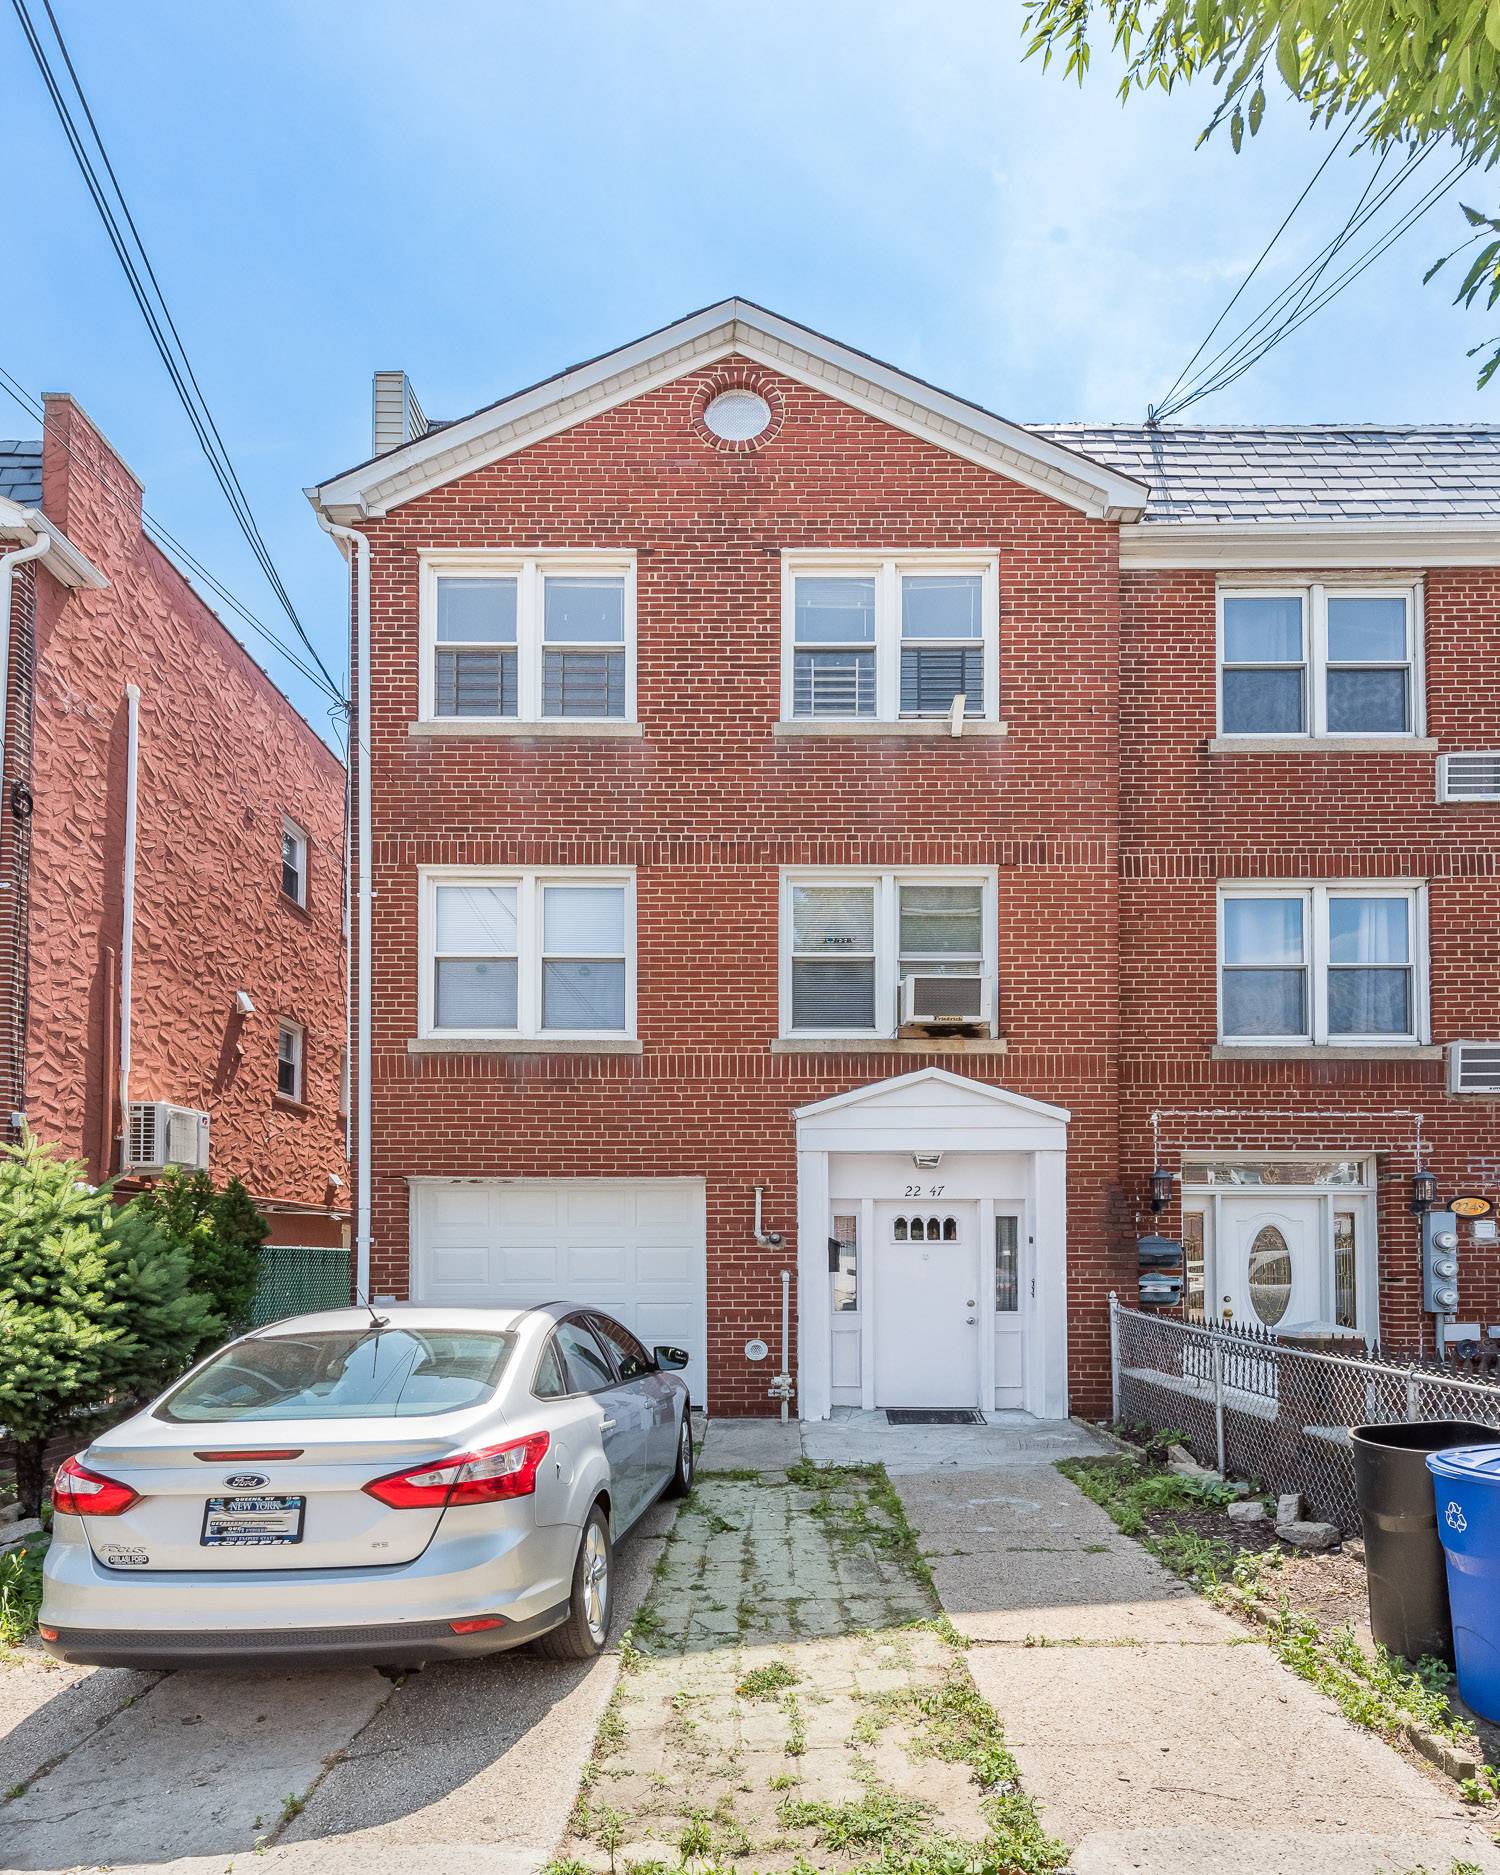 Large Brick 3 Family Semi Attached Home Located In The Very Desirable Upper Ditmars Area.